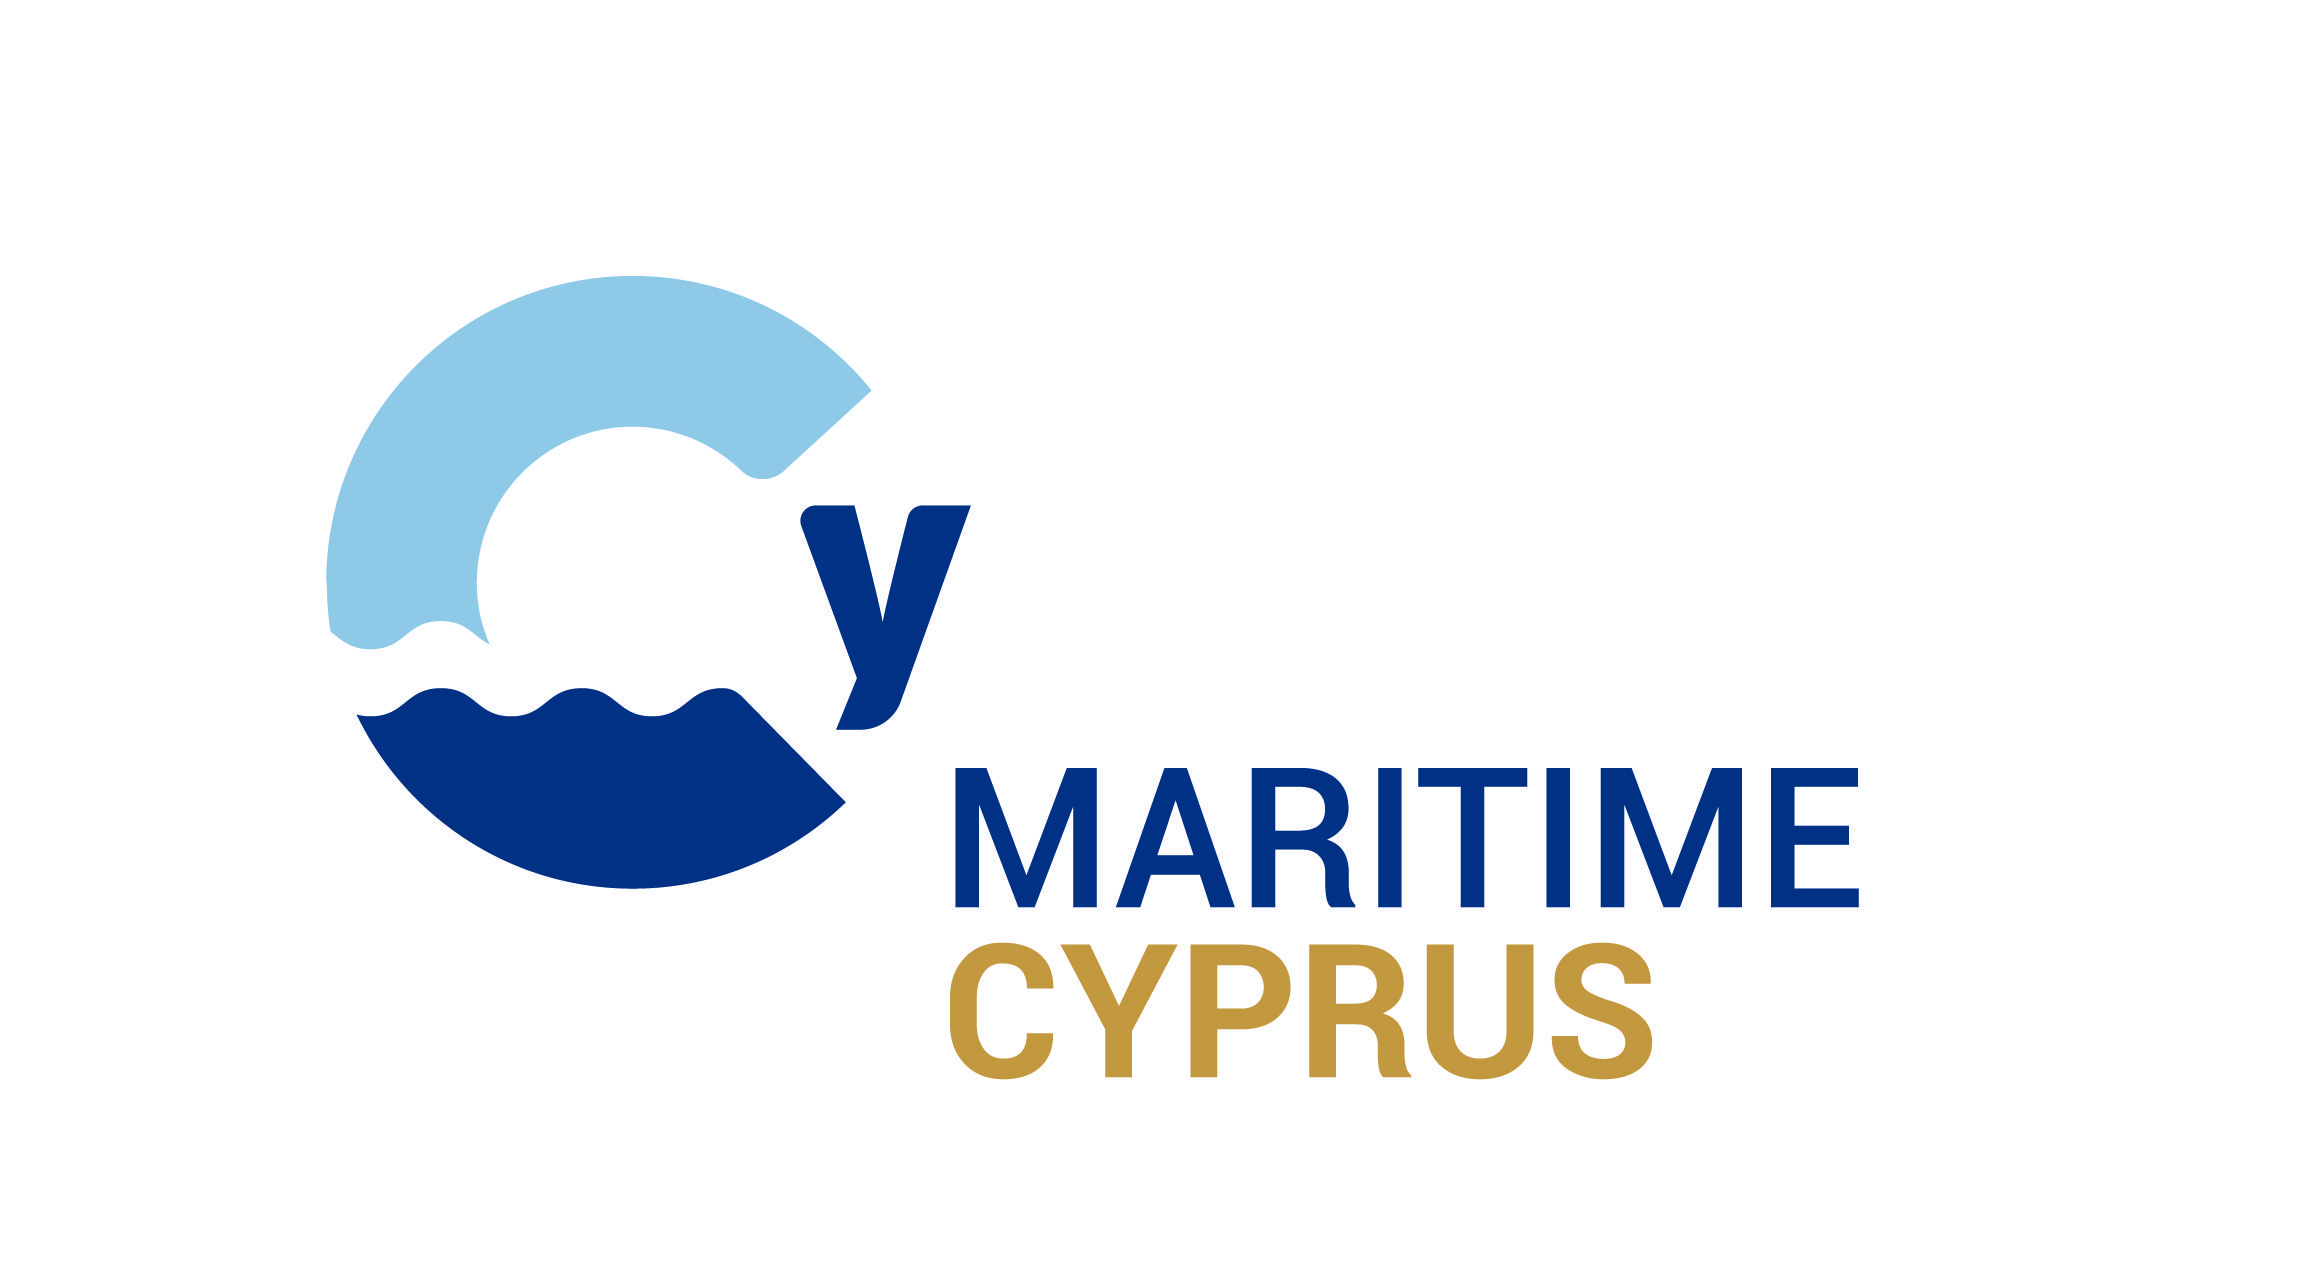 Press release: Maritime Cyprus rescheduled for 2022